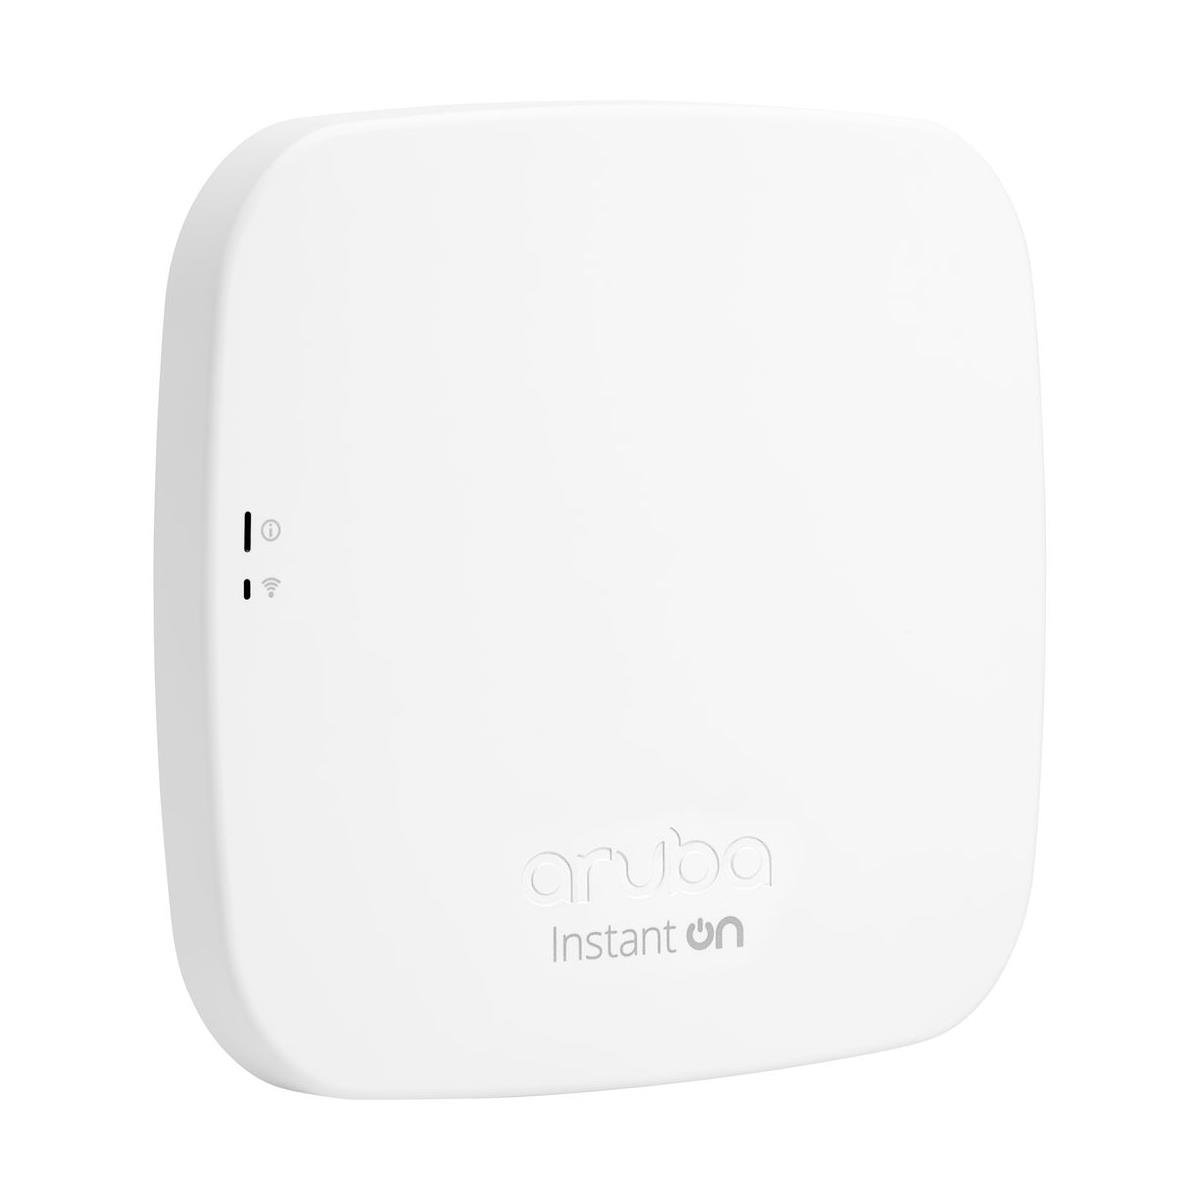 Image of Aruba Instant On AP11 Indoor Access Point with DC Power Adapter and Cord Bundle